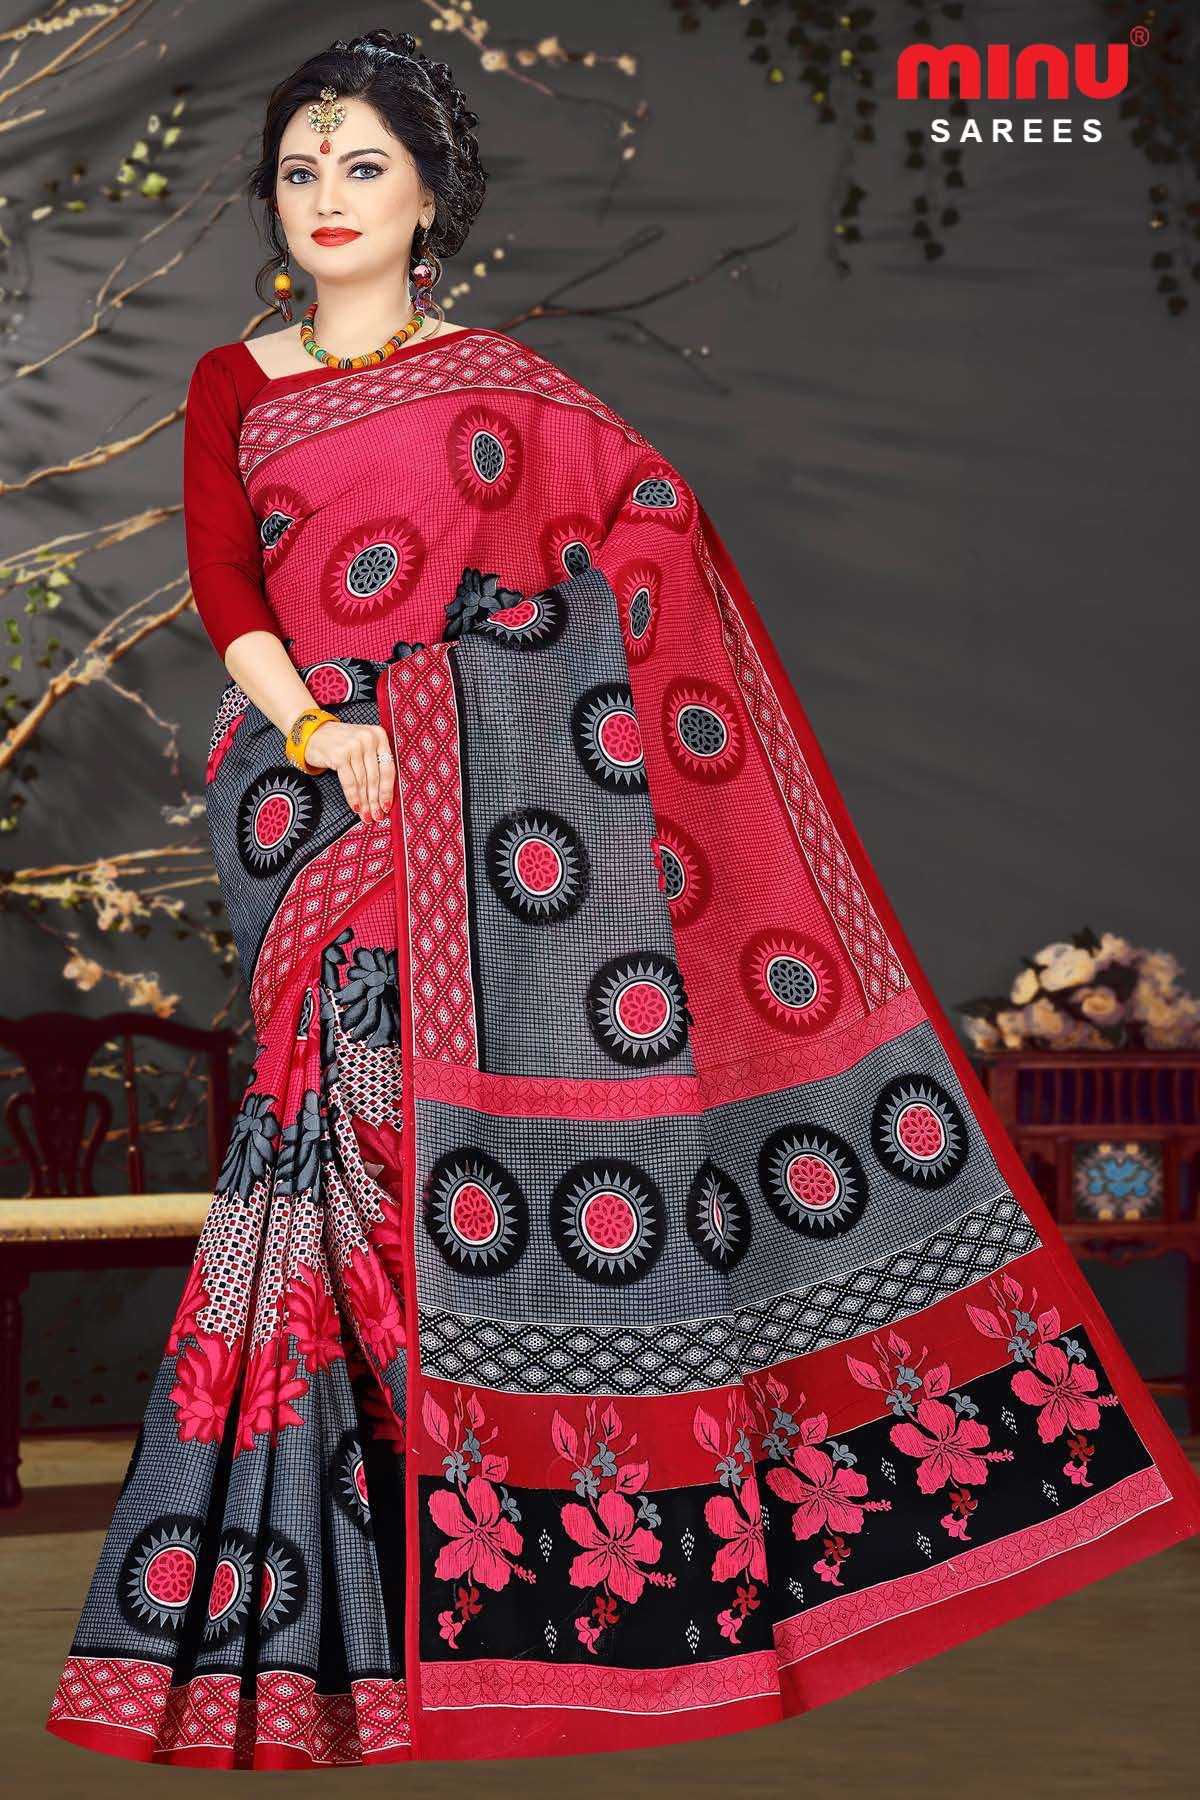 Red printed saree wearing women flaunting her beauty